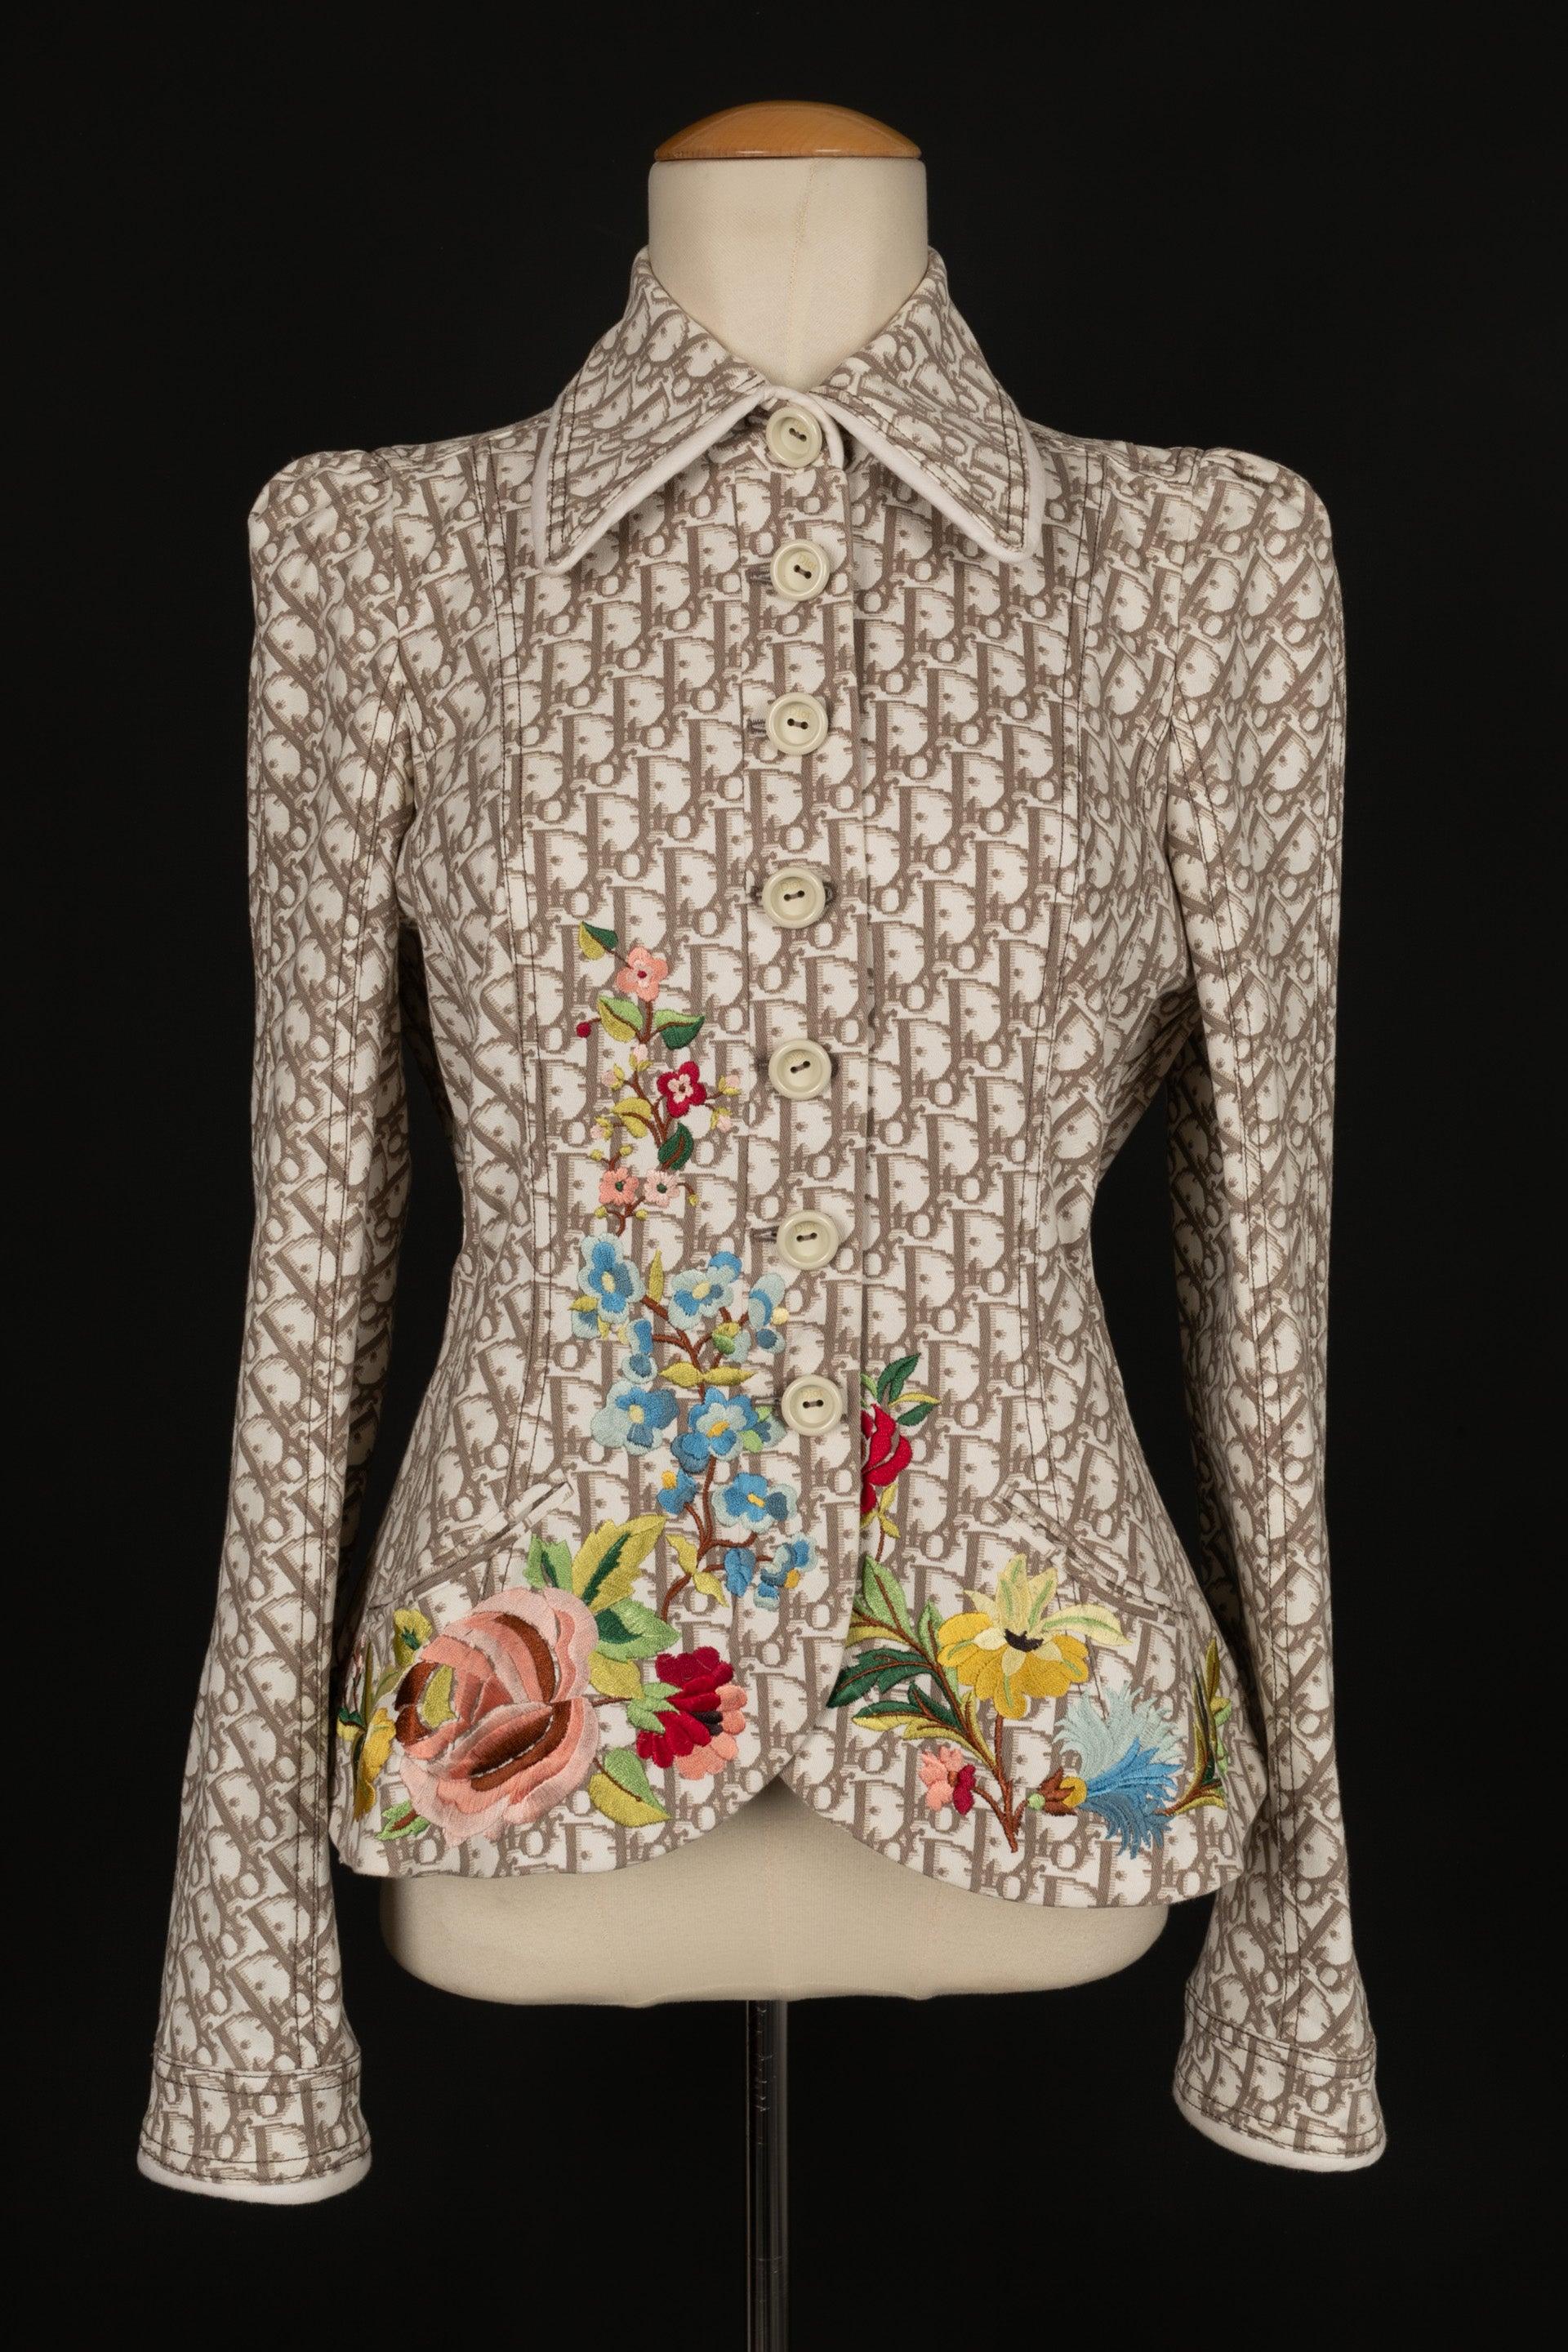 Dior - (Made in France) Monogrammed cotton jacket embroidered with flowers. No size nor composition label, it fits a 36FR. Spring-Summer 2005 Ready-to-Wear Collection under the artistic direction of John Galliano.

Additional information:
Condition: